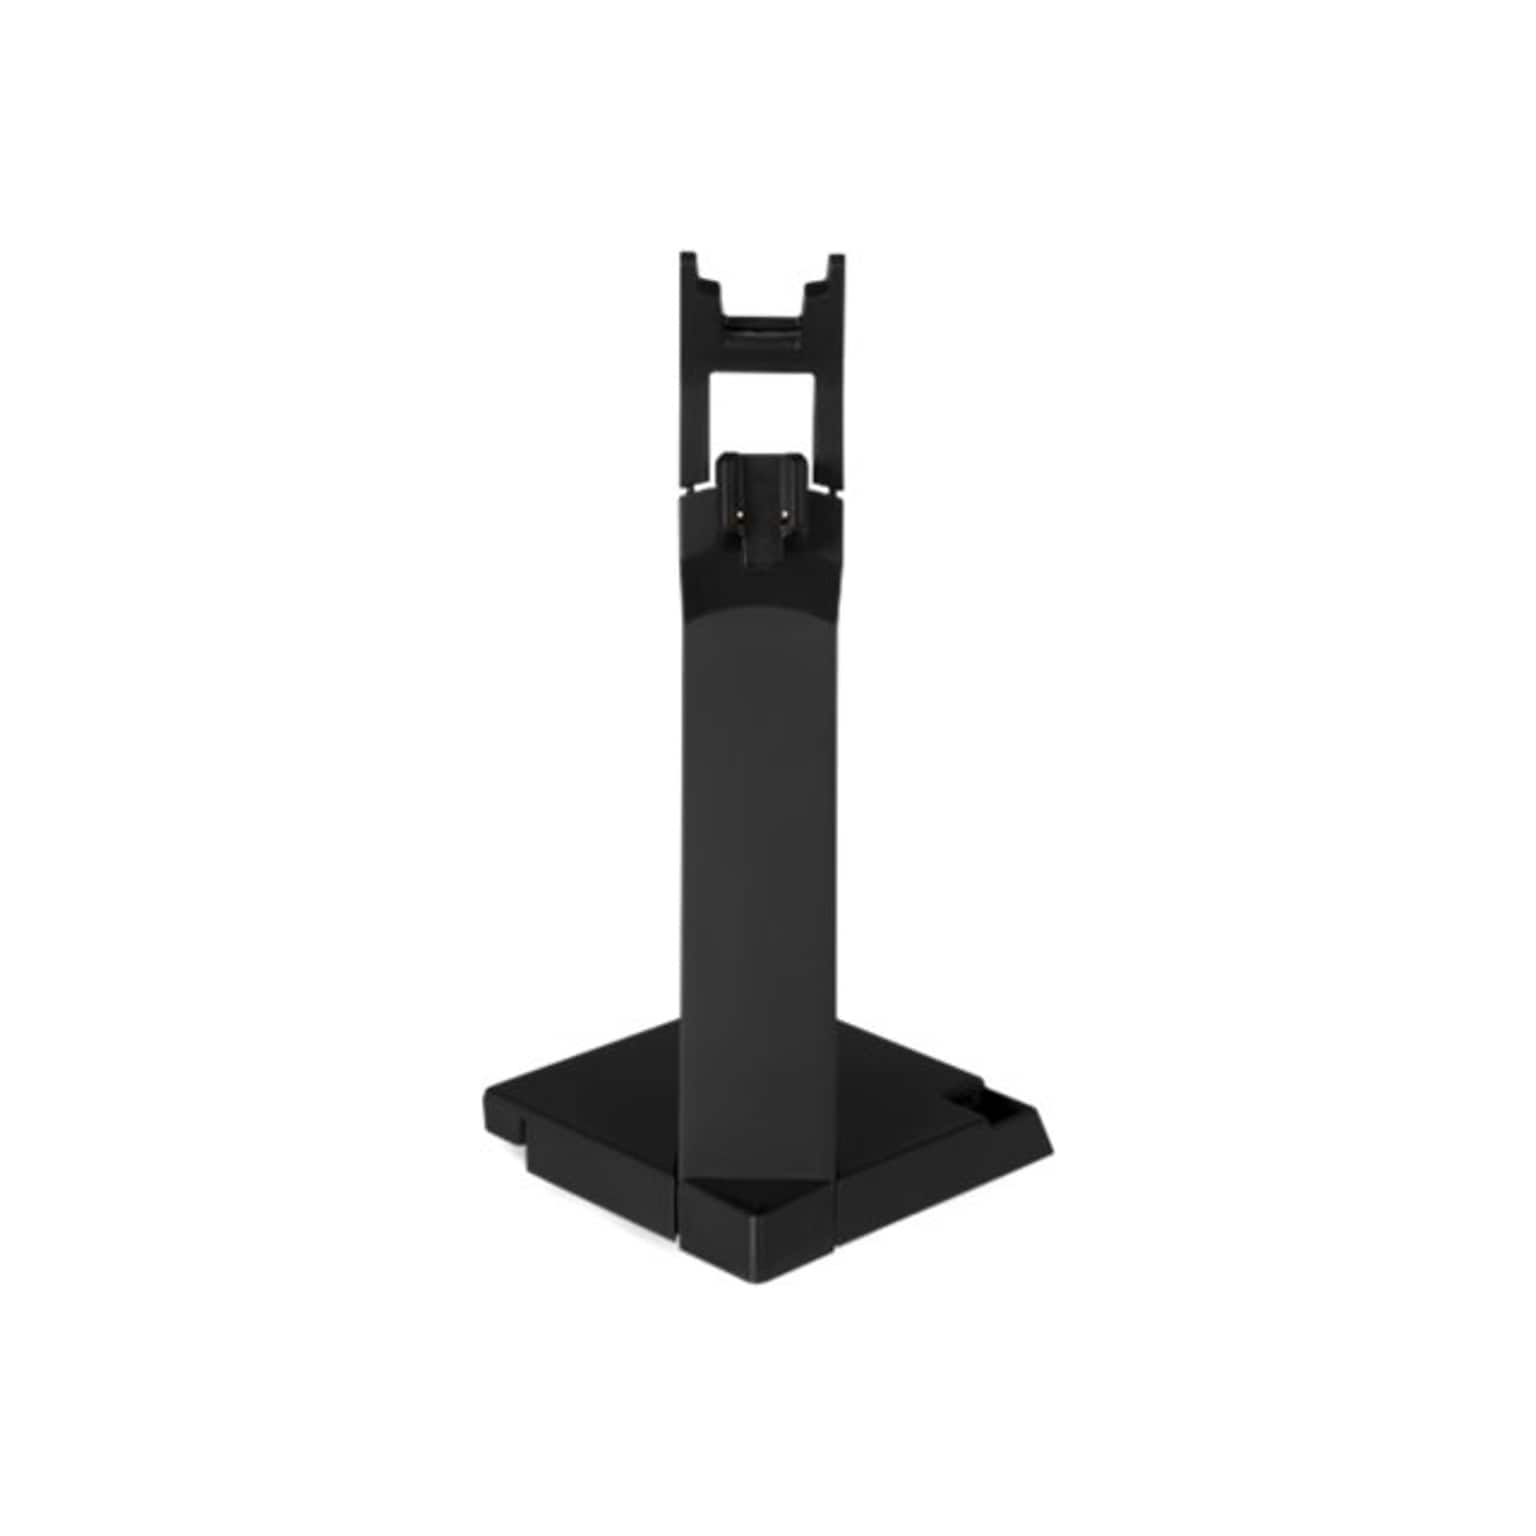 EPOS CH 30 Headset Charger Stand, Black (1000702)